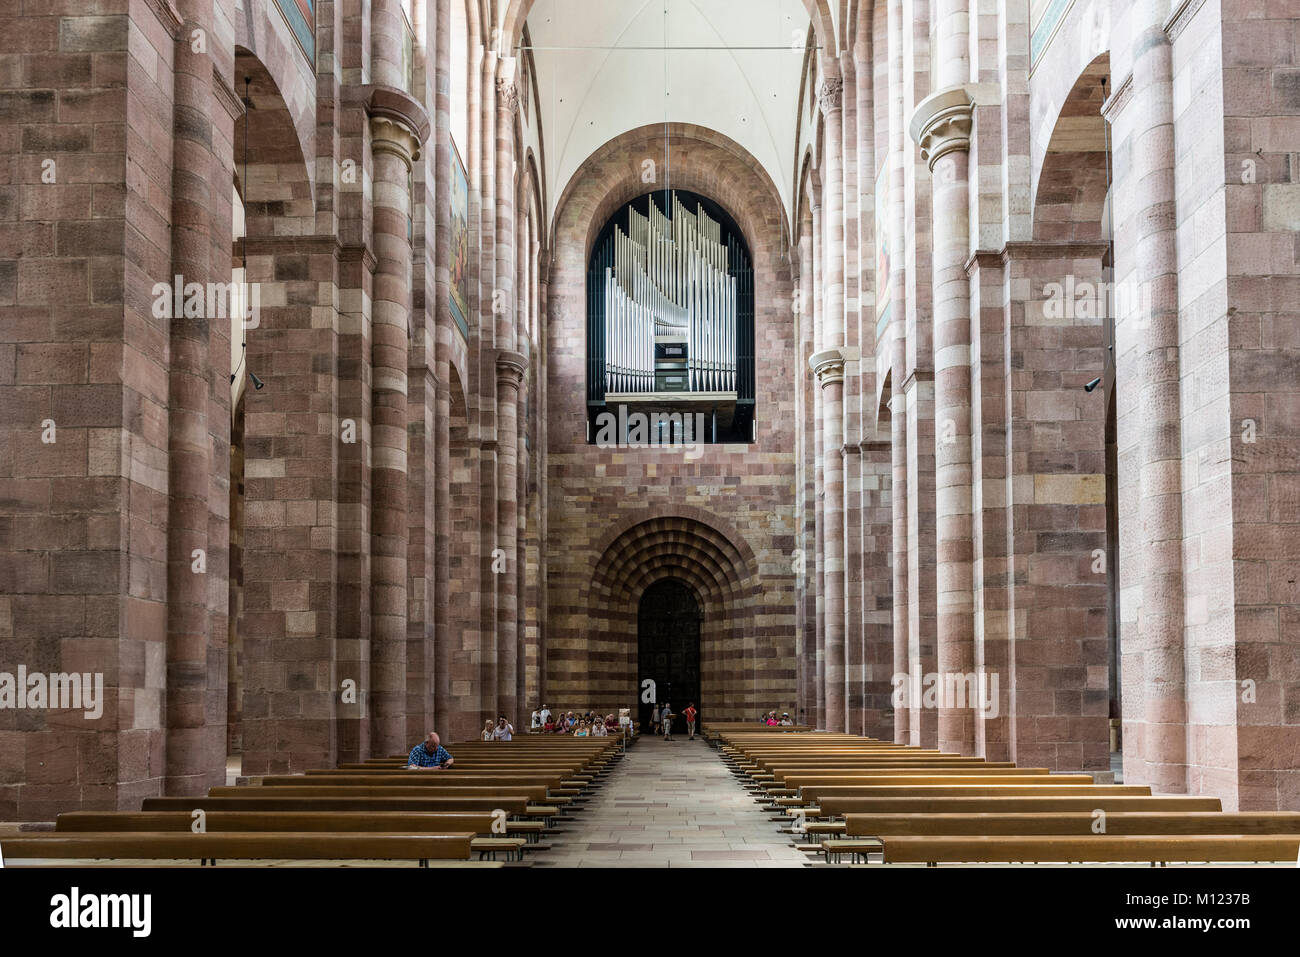 Interior view of central nave with organ,Speyer Cathedral,Kaiserdom,Speyer,Rhineland-Palatinate,Germany Stock Photo